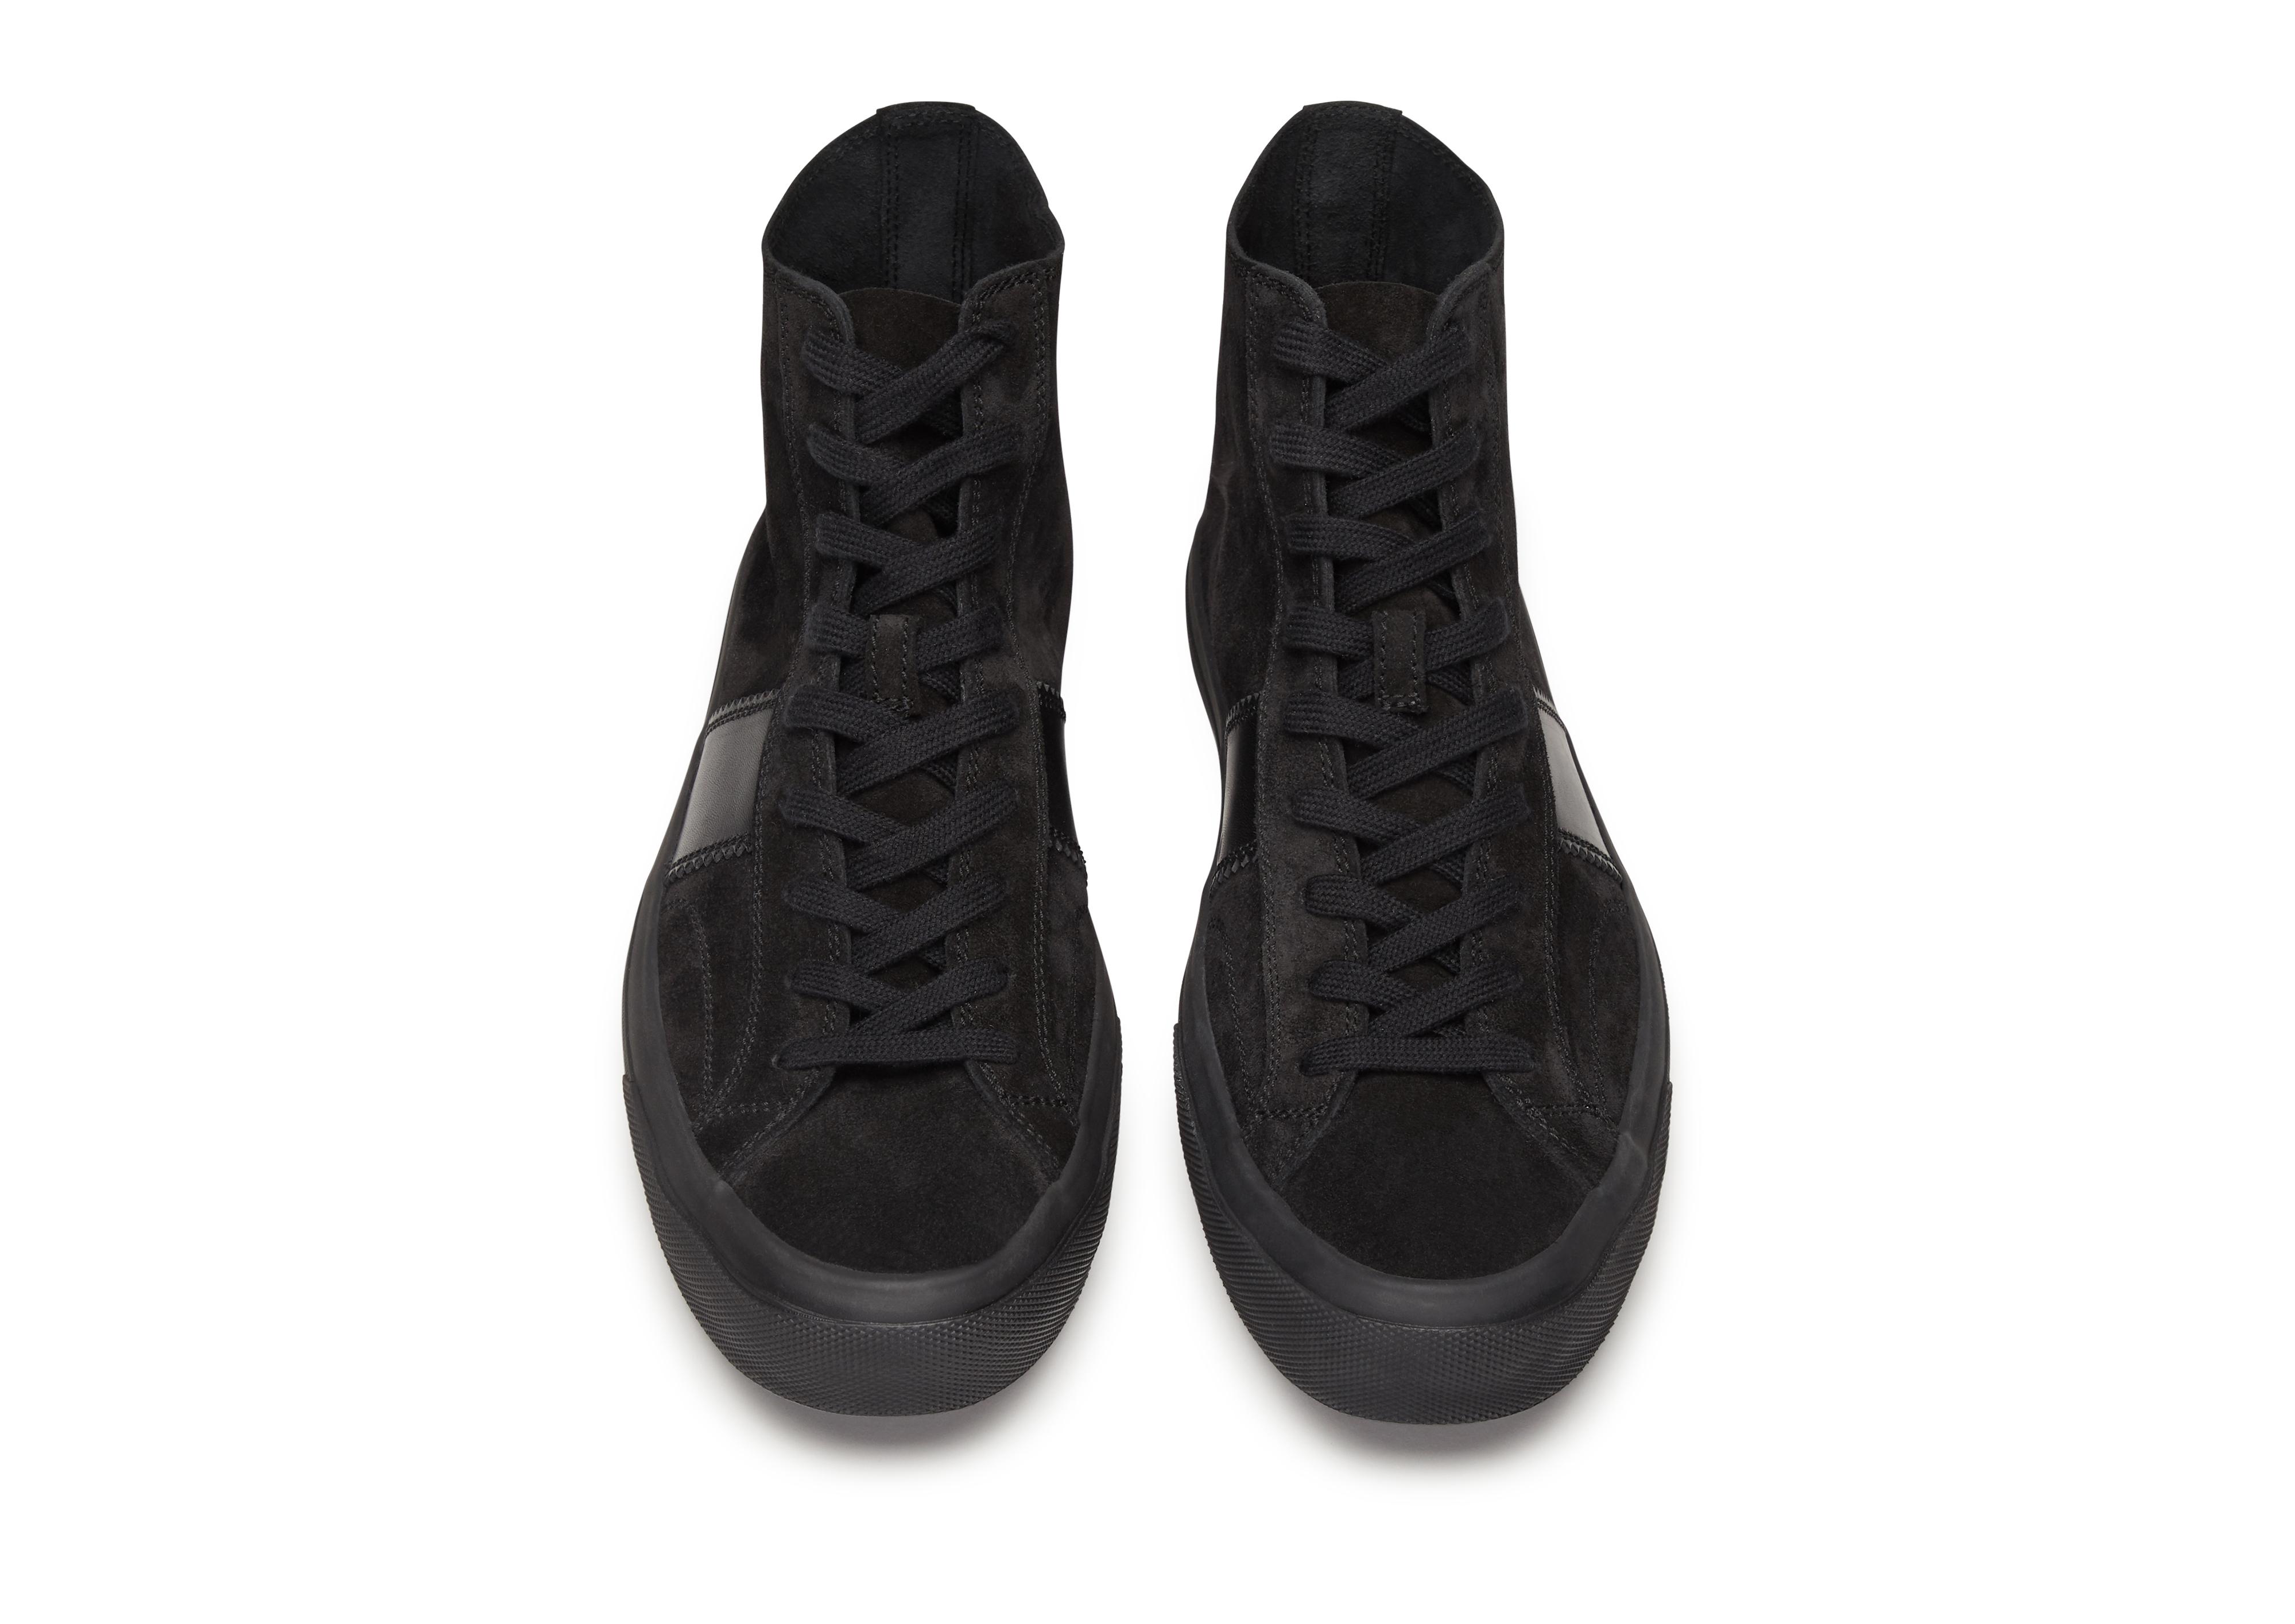 Tom Ford CROSTA SUEDE CAMBRIDGE HIGH TOP SNEAKERS 